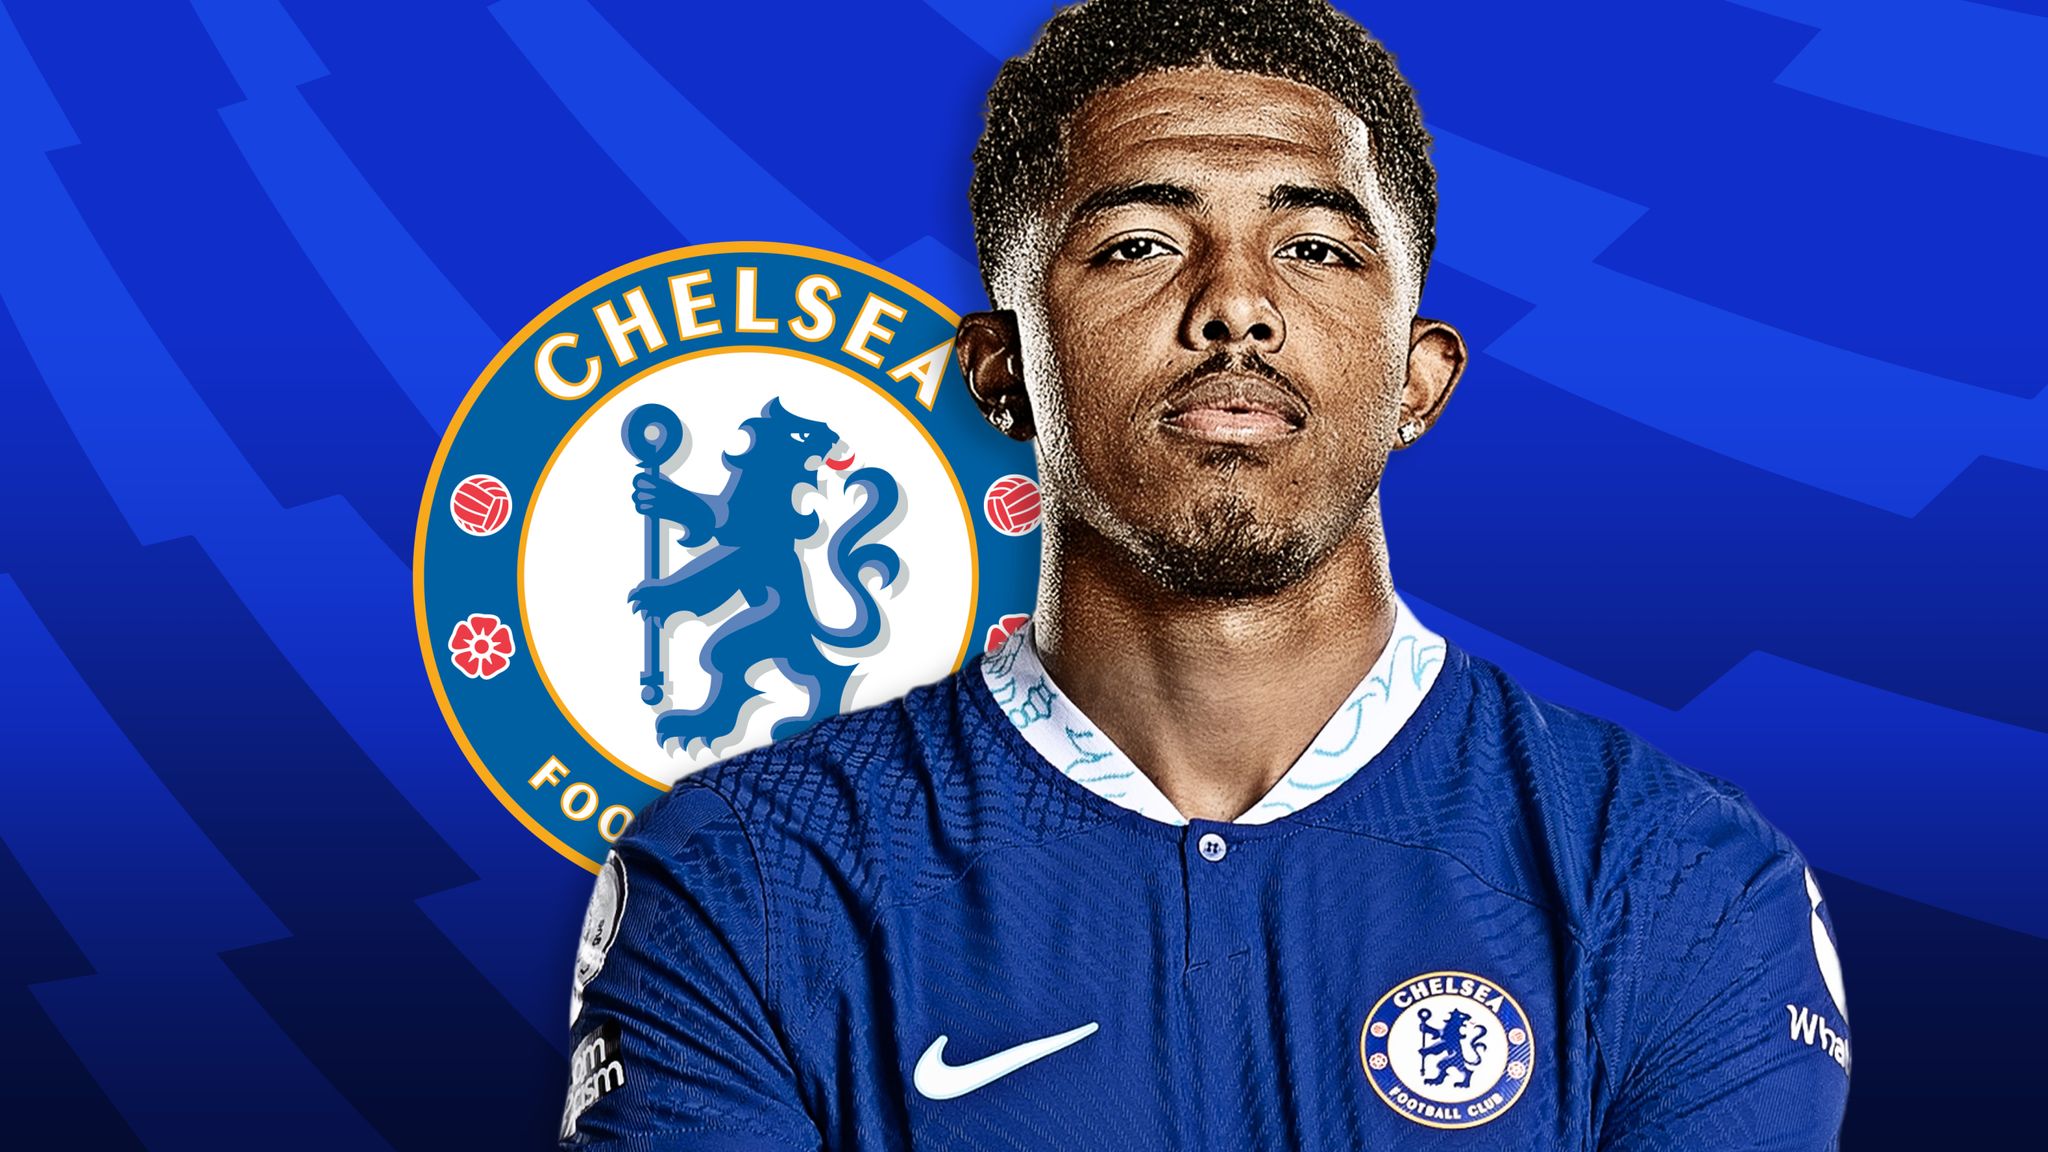 Wesley Fofana's physicality, defensive prowess and ball-carrying ability is making the difference for Chelsea | Football News | Sky Sports